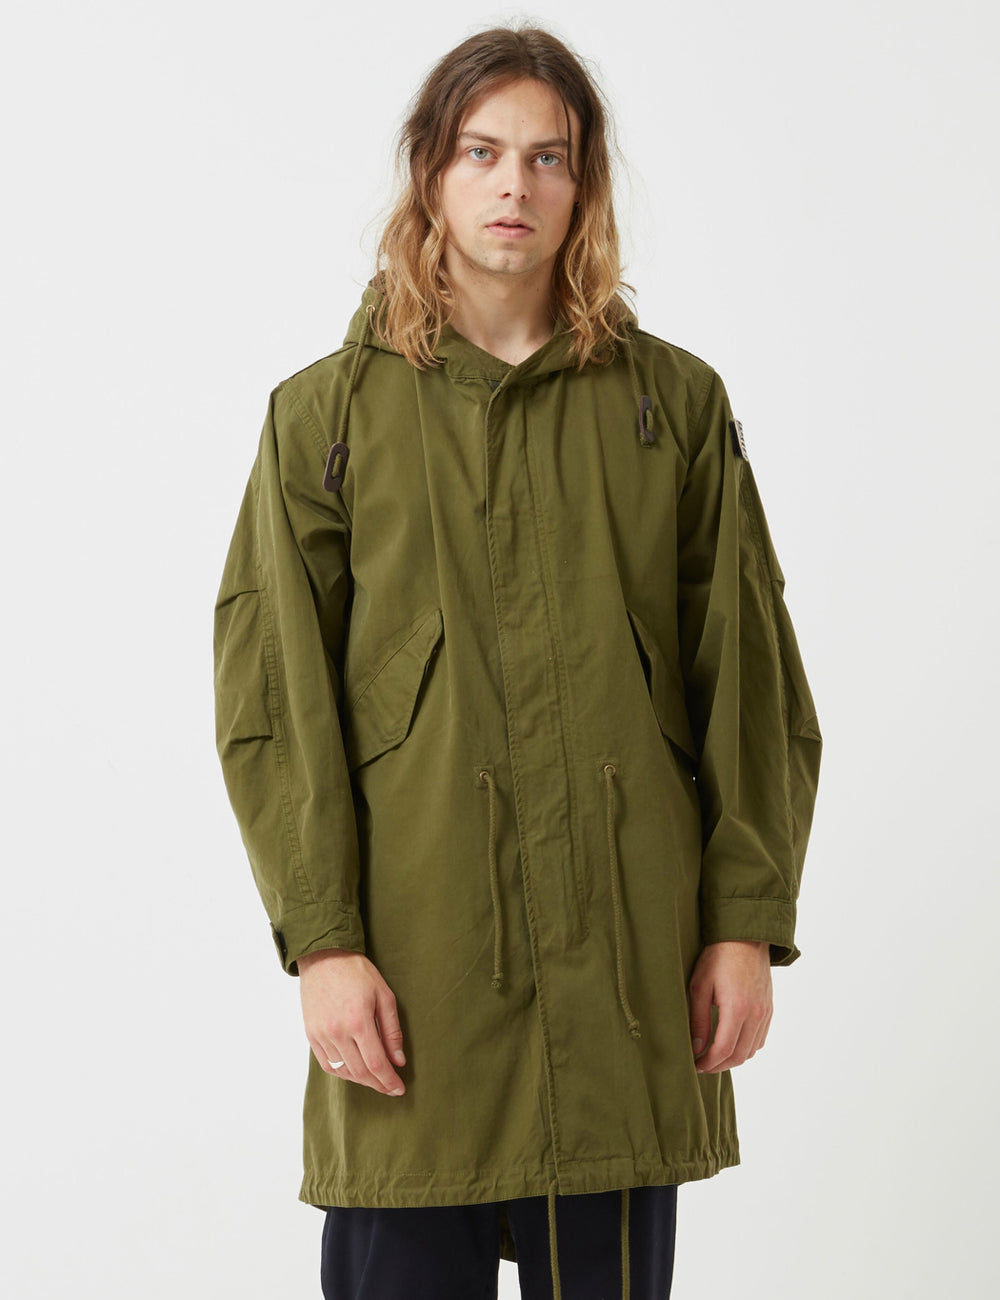 Stan Ray M51 Parka - Olive Drab | URBAN EXCESS.